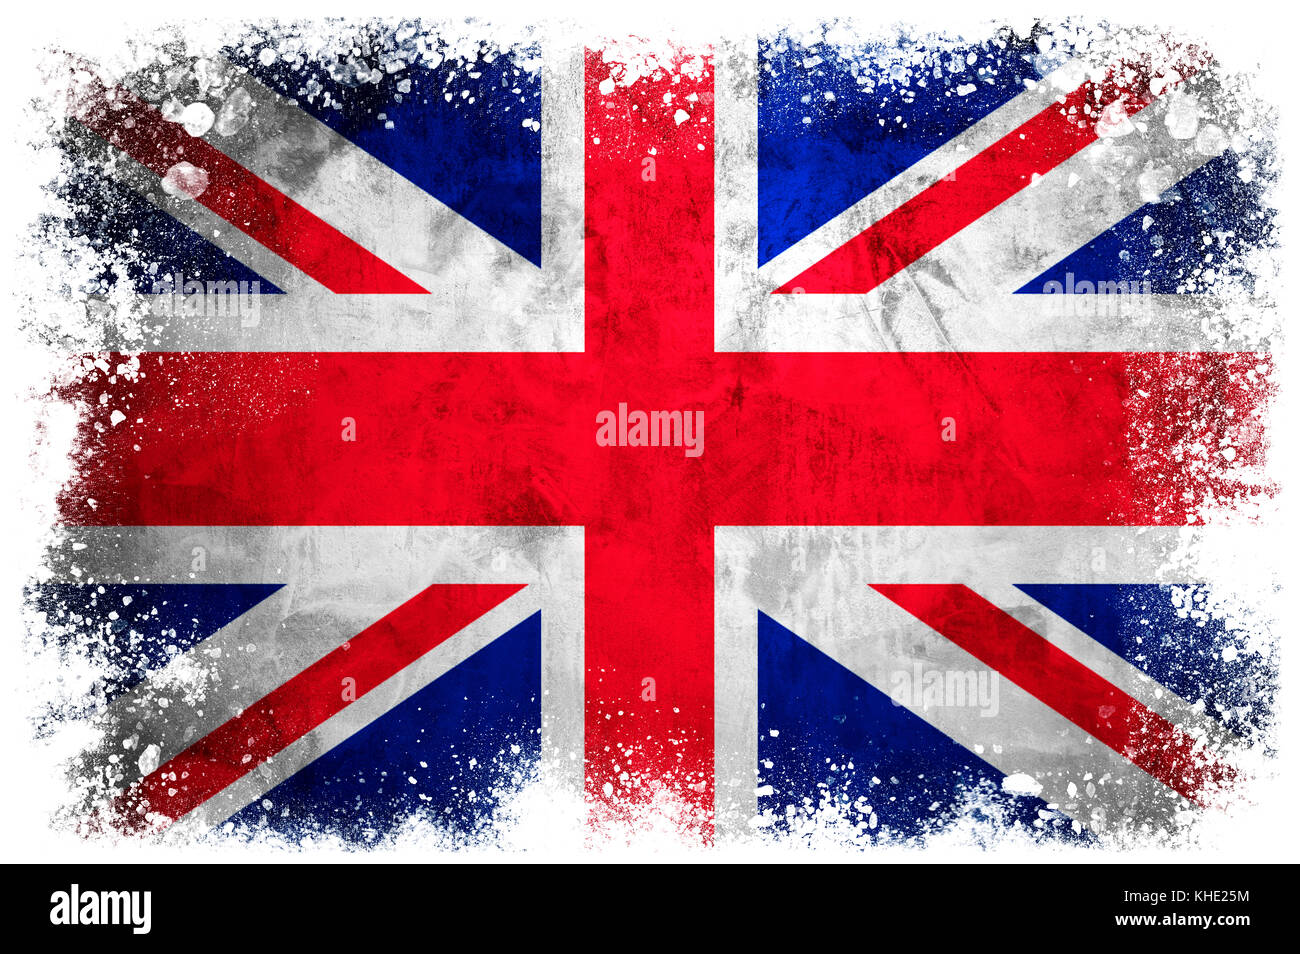 National flag of Great Britain on grunge concrete background Stock Photo